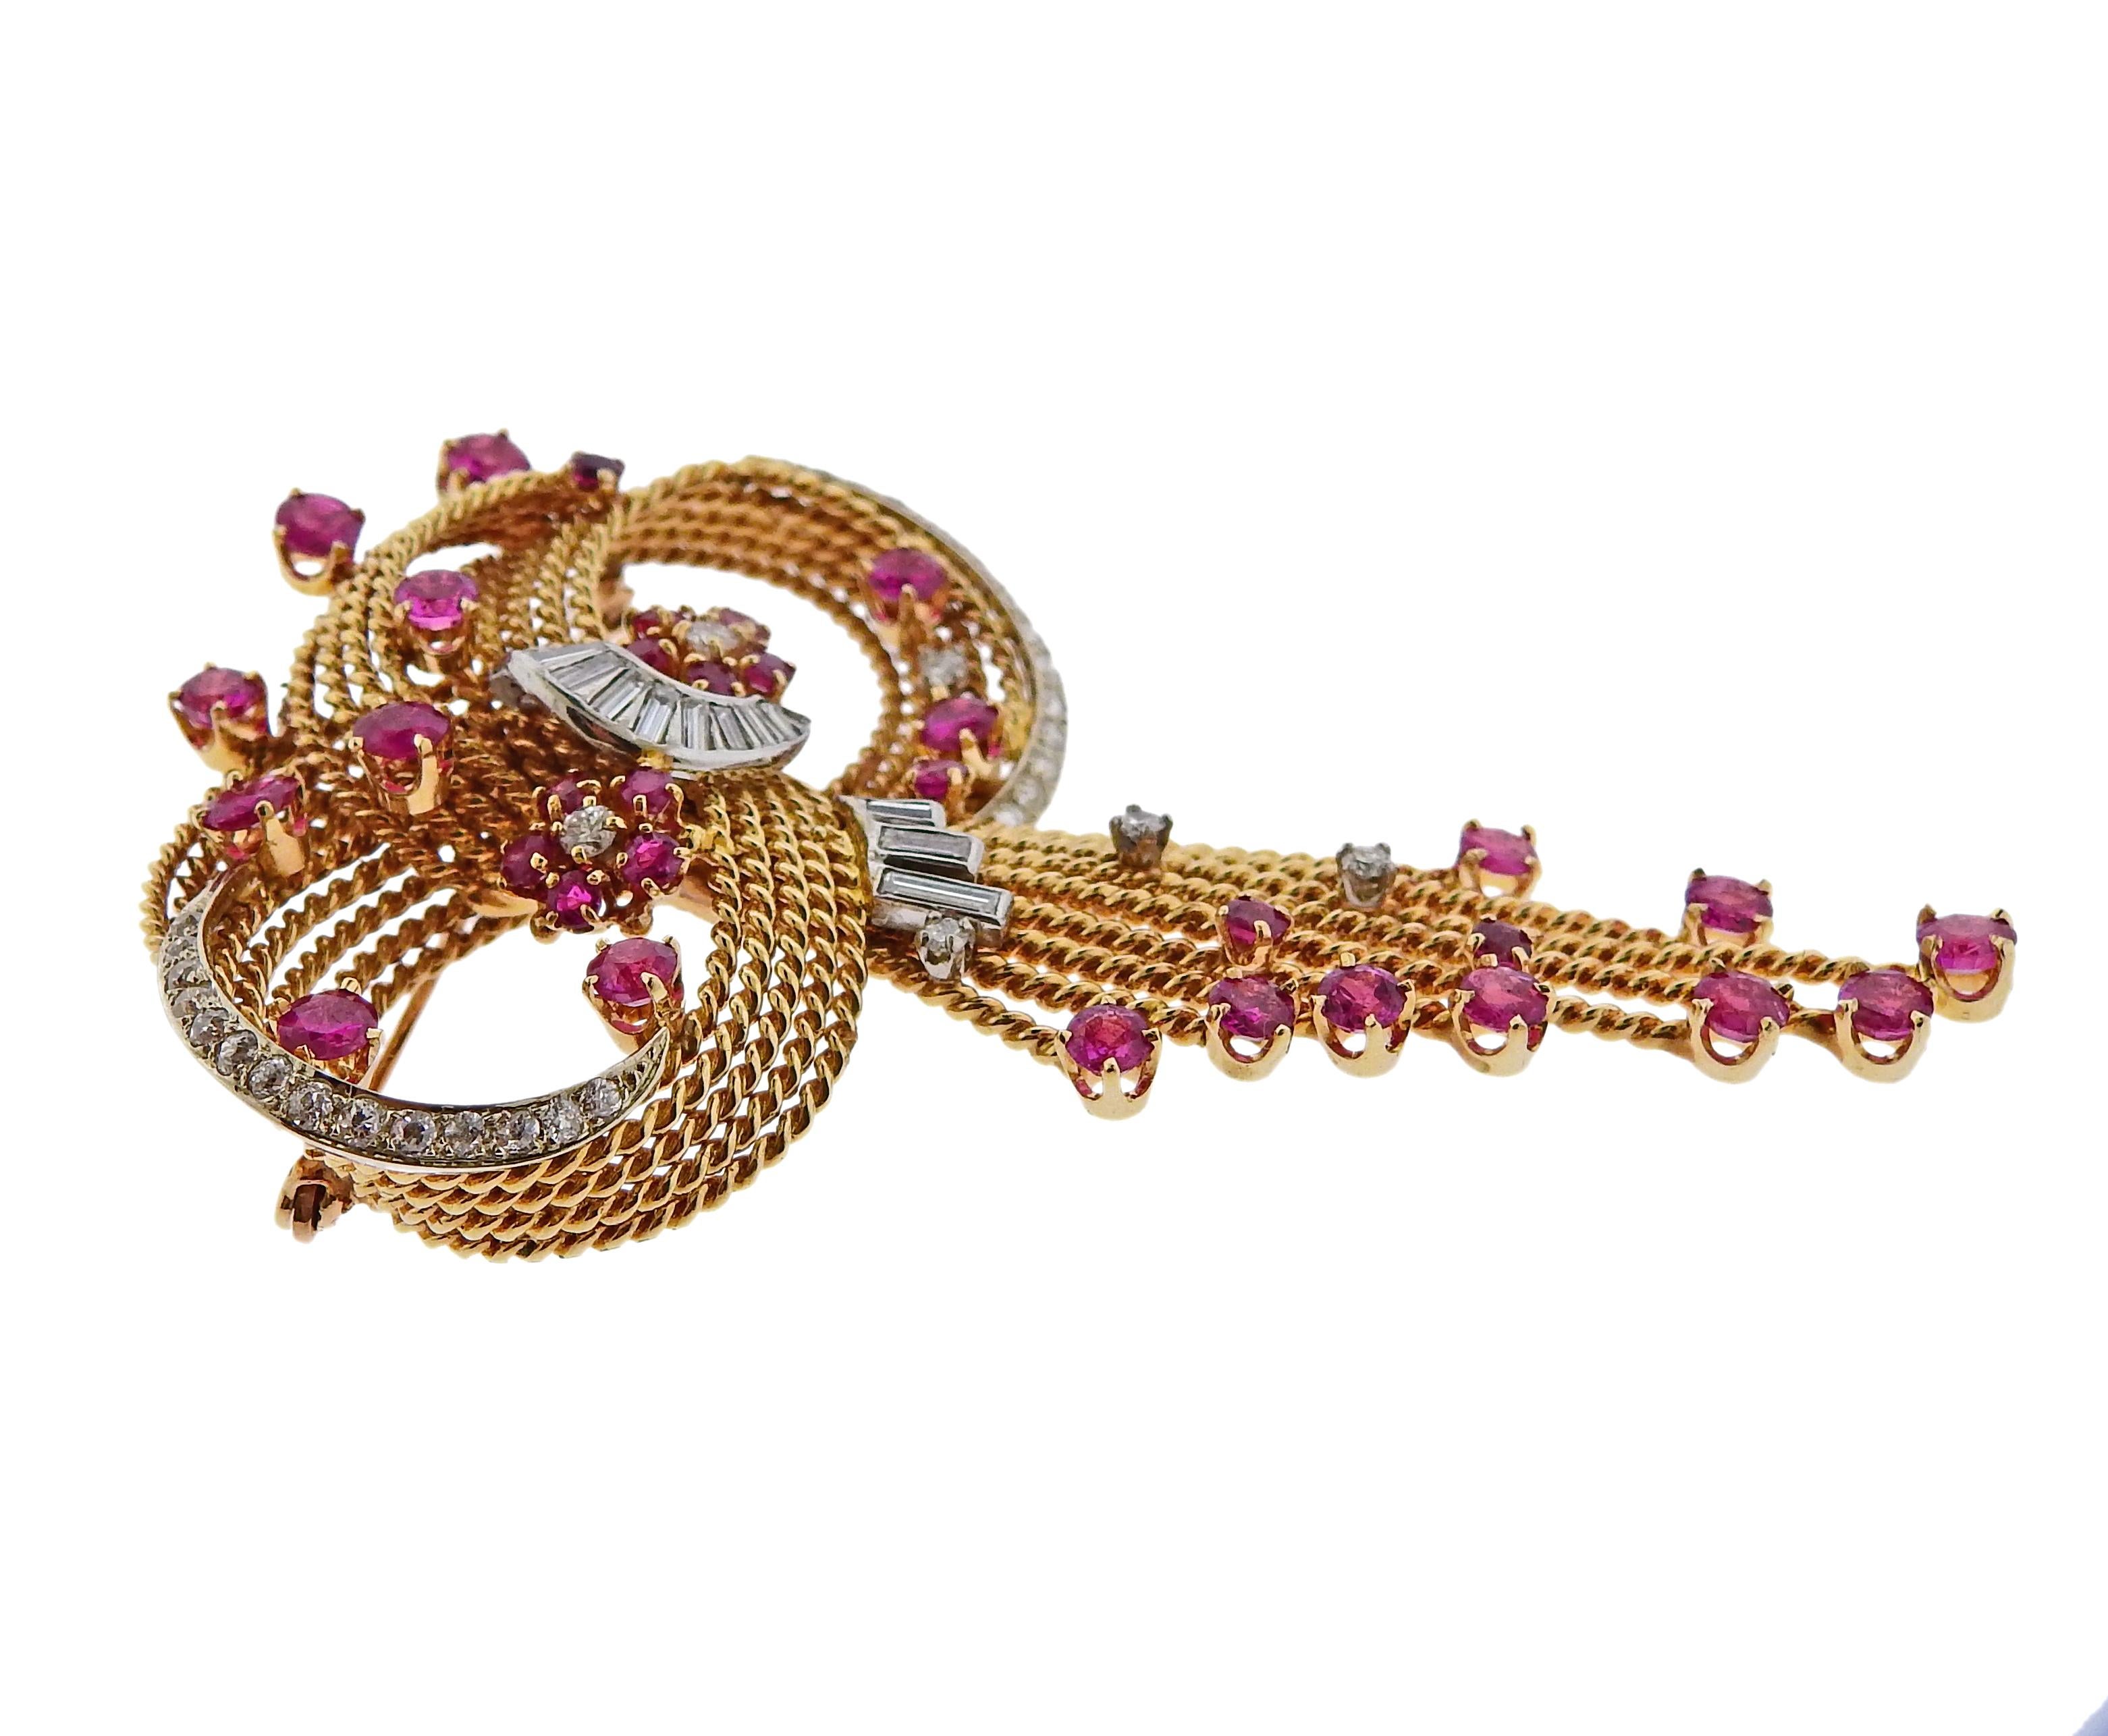 Retro circa mid century large brooch, set with rubies and approx. 0.40ctw in diamonds. Brooch measures 77mm x 50mm. Weighs 29.7 grams. 

SKU#PB-02985